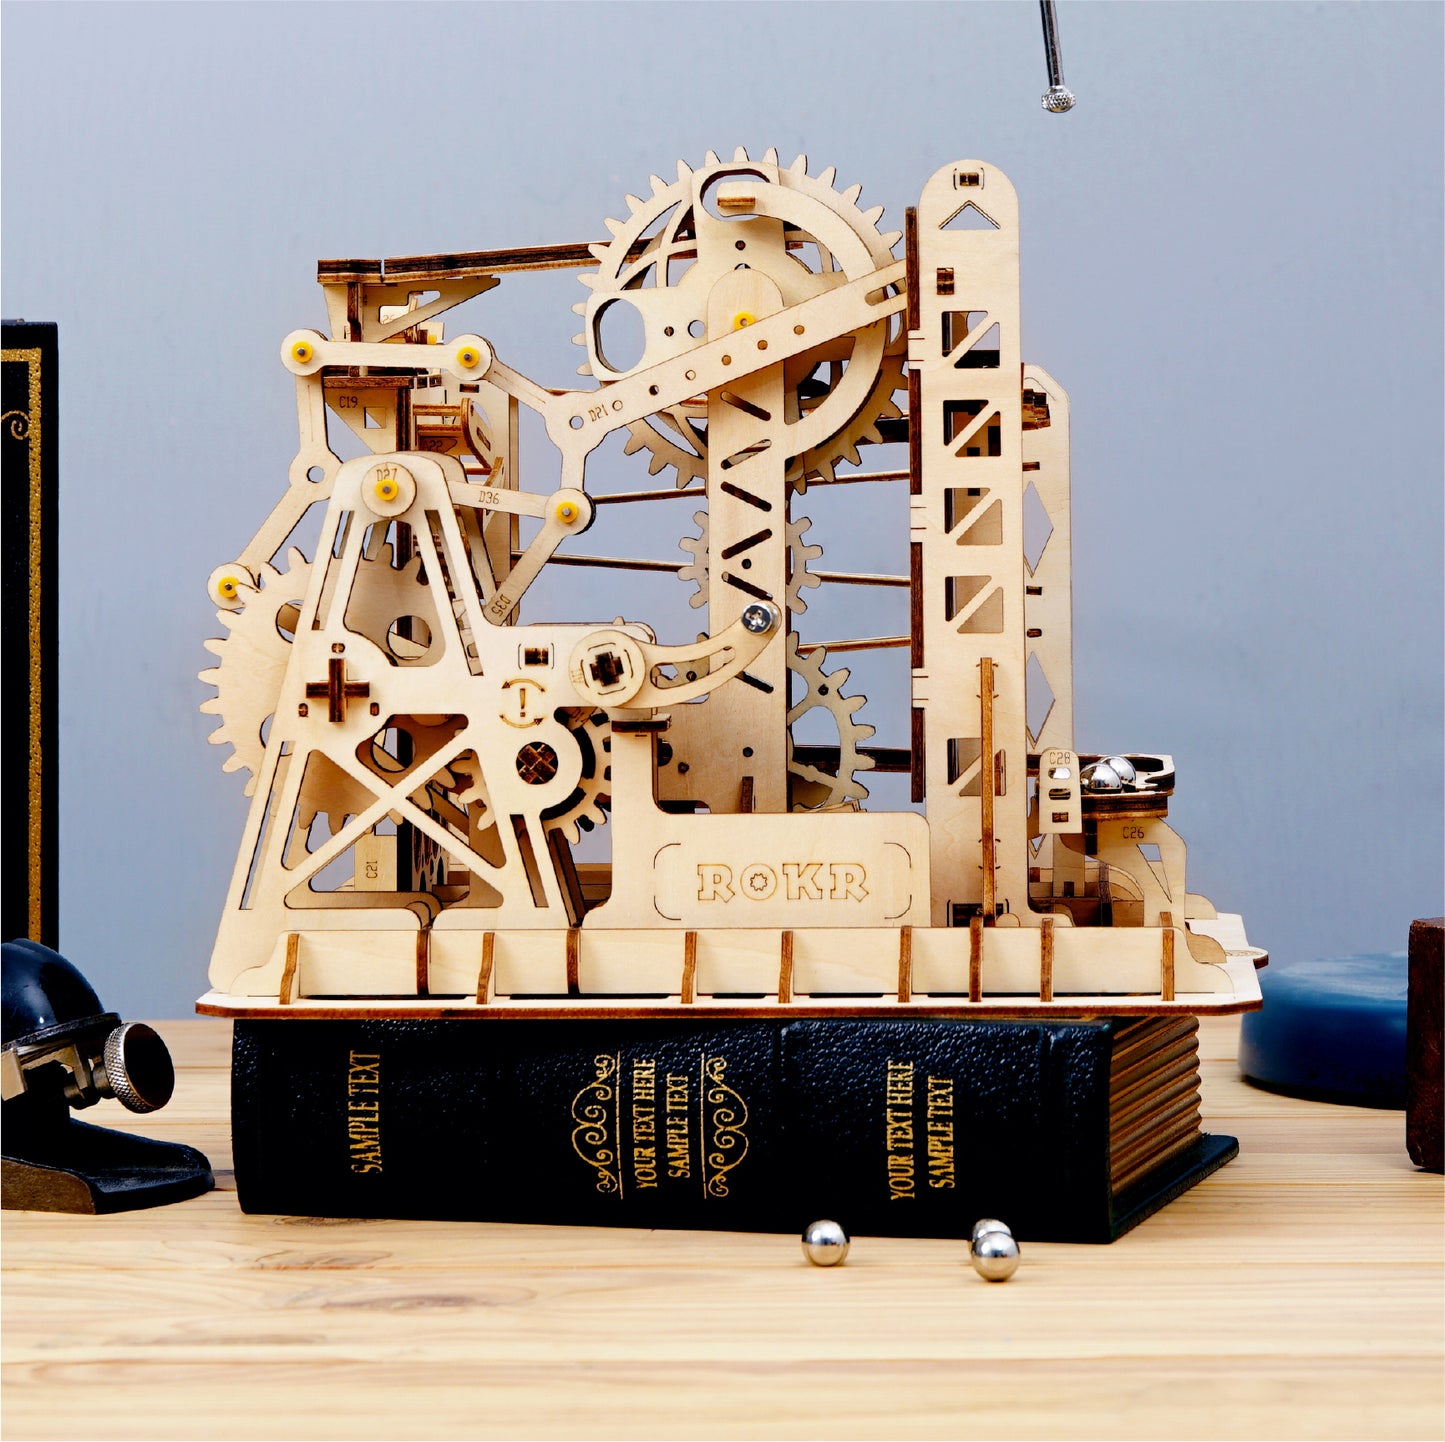 Robotime 3D Wooden Puzzle Toy - Marble Run - Explorer - Woodylands Crafts